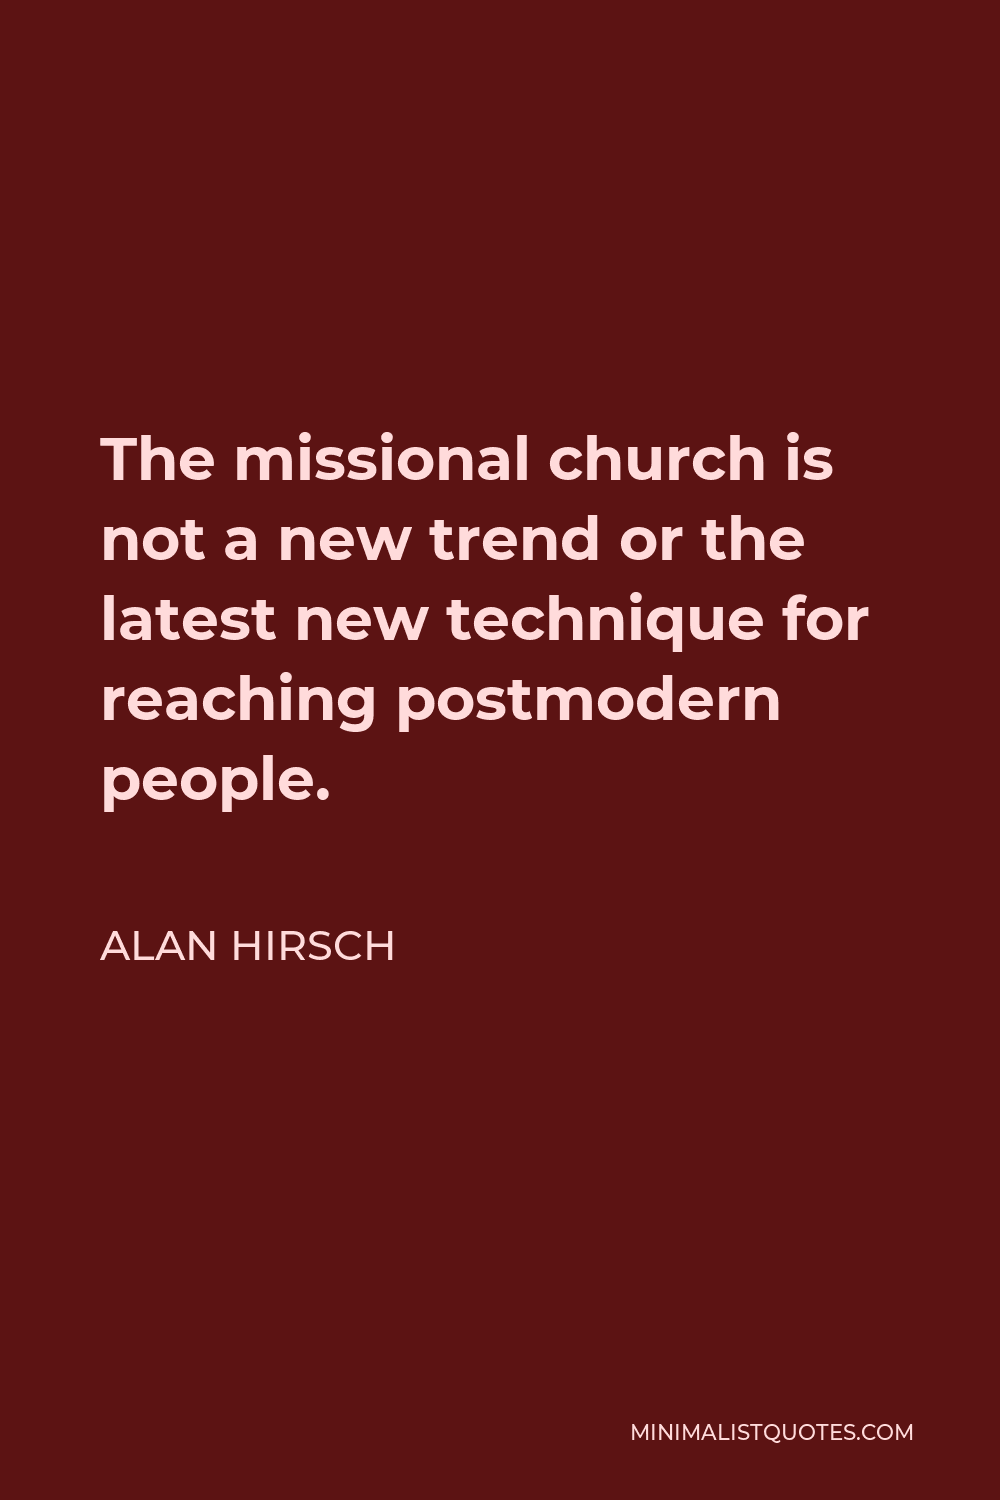 Alan Hirsch Quote - The missional church is not a new trend or the latest new technique for reaching postmodern people.